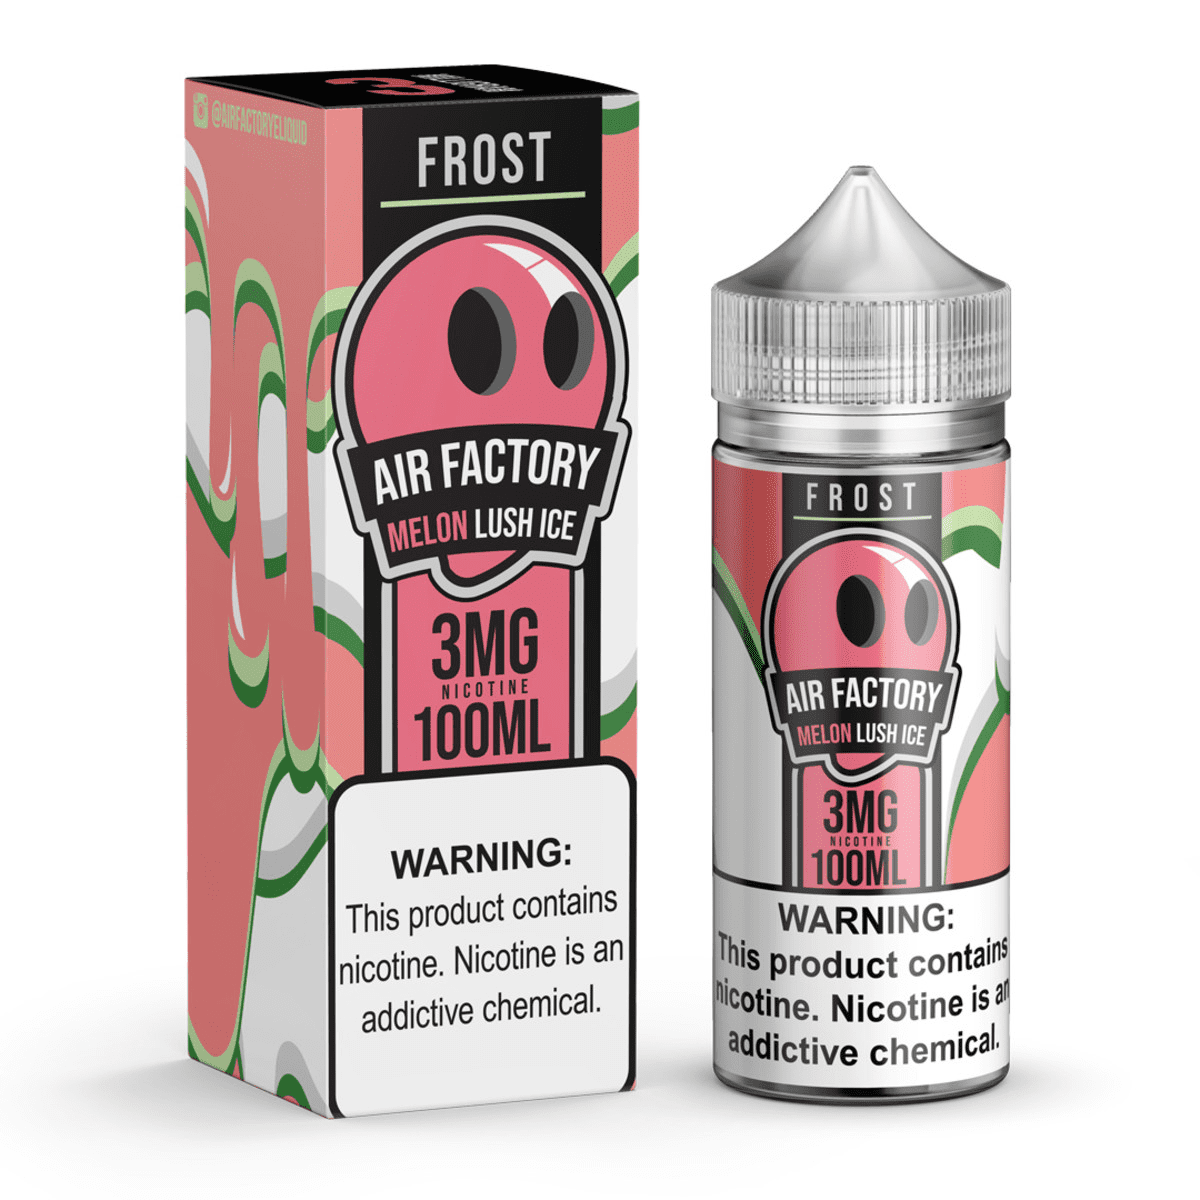 FROST BLUE RAZZ ICE 100ml By AIR FACTORY